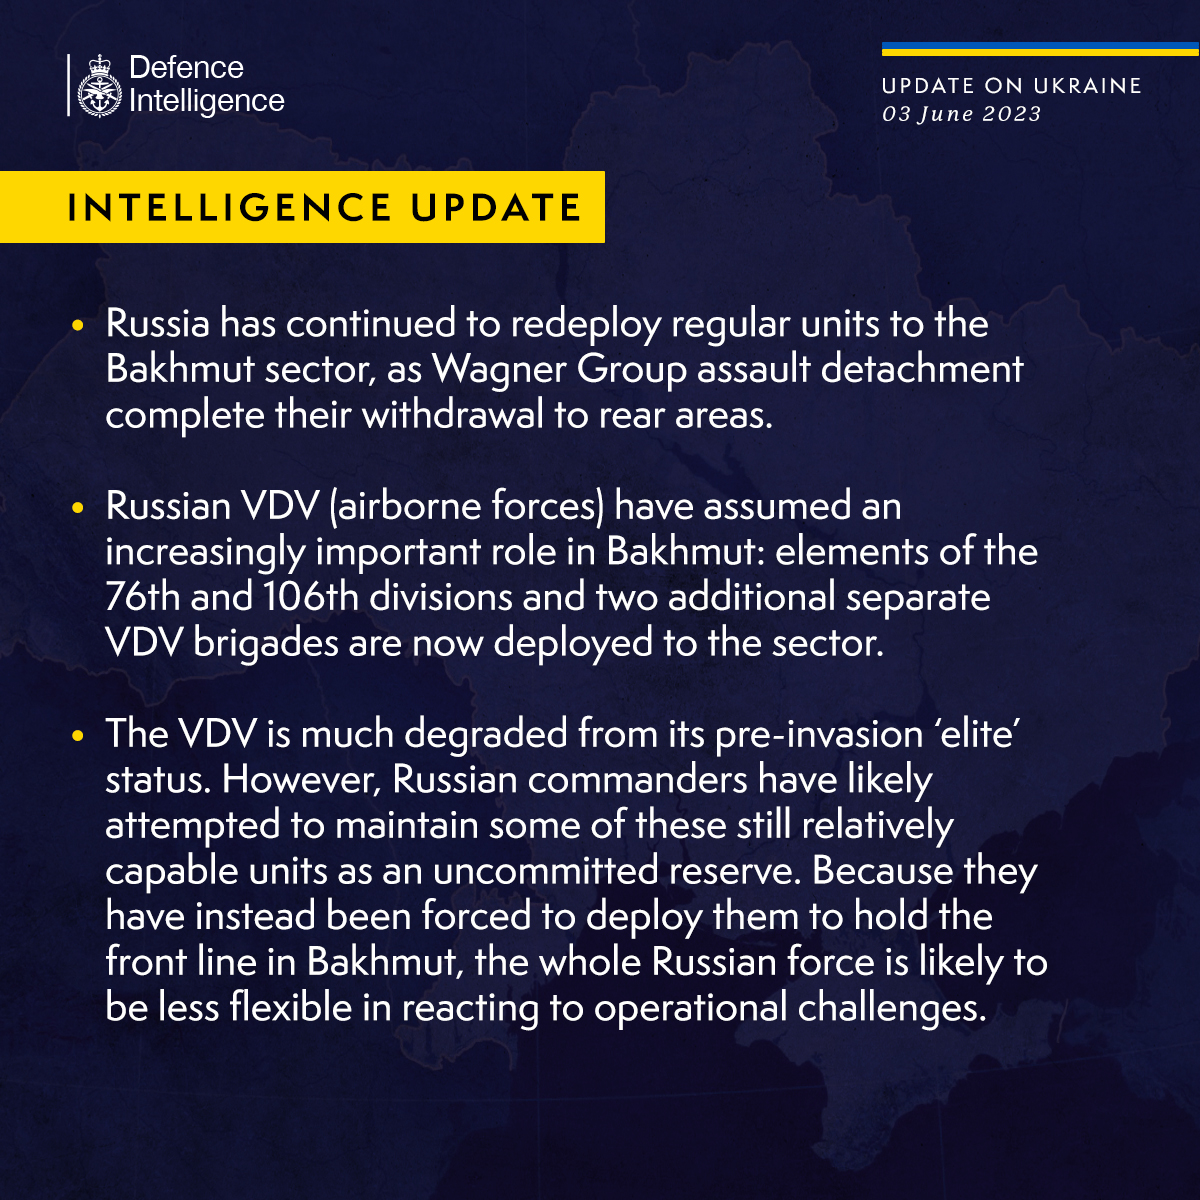 The UK Defense Intelligence Says russian Forces Less Flexible to Operational Challenges As They Forced to Use Reserves to Hold Bakhmut, Defense Express